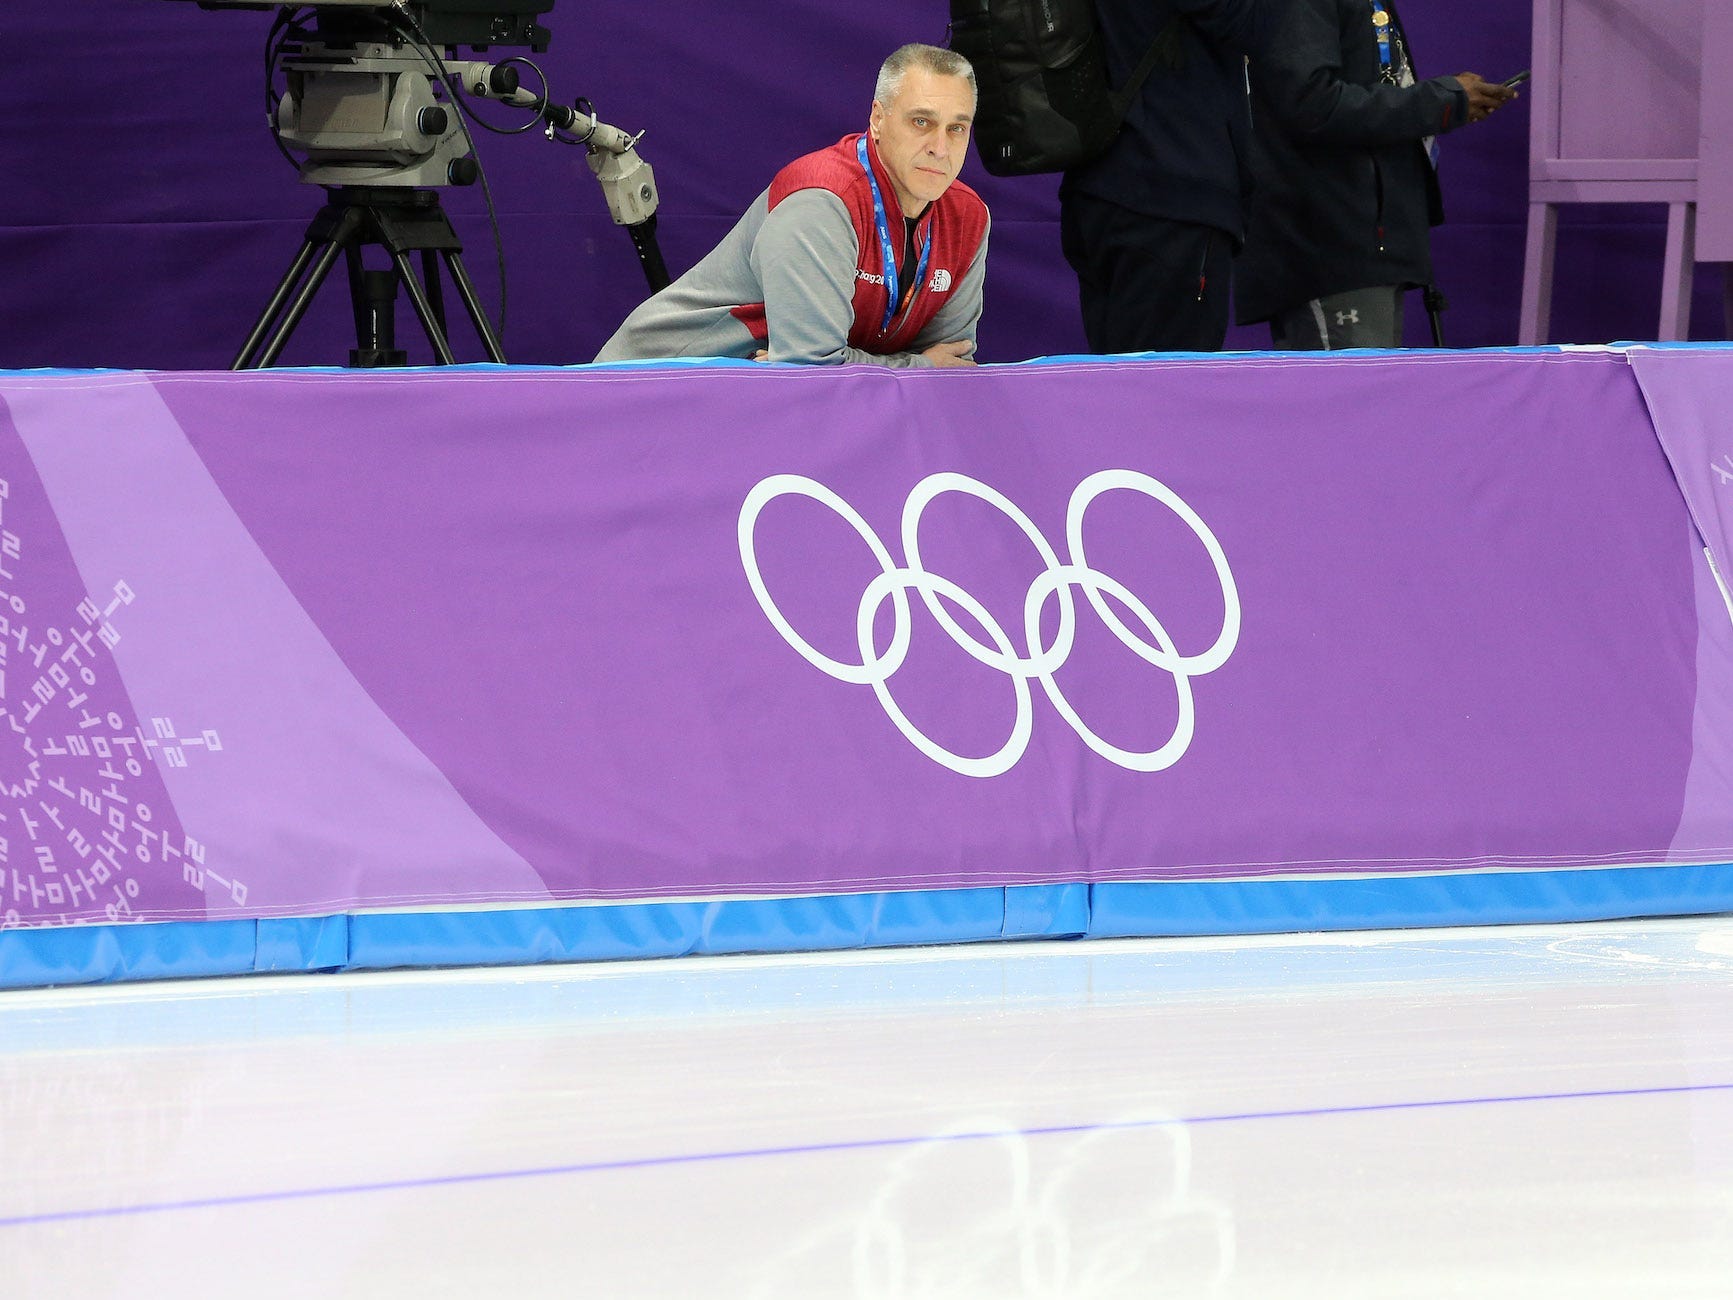 Mark Messer leans on a barrier and overlooks the ice oval at the 2018 Pyeongchang Olympics.